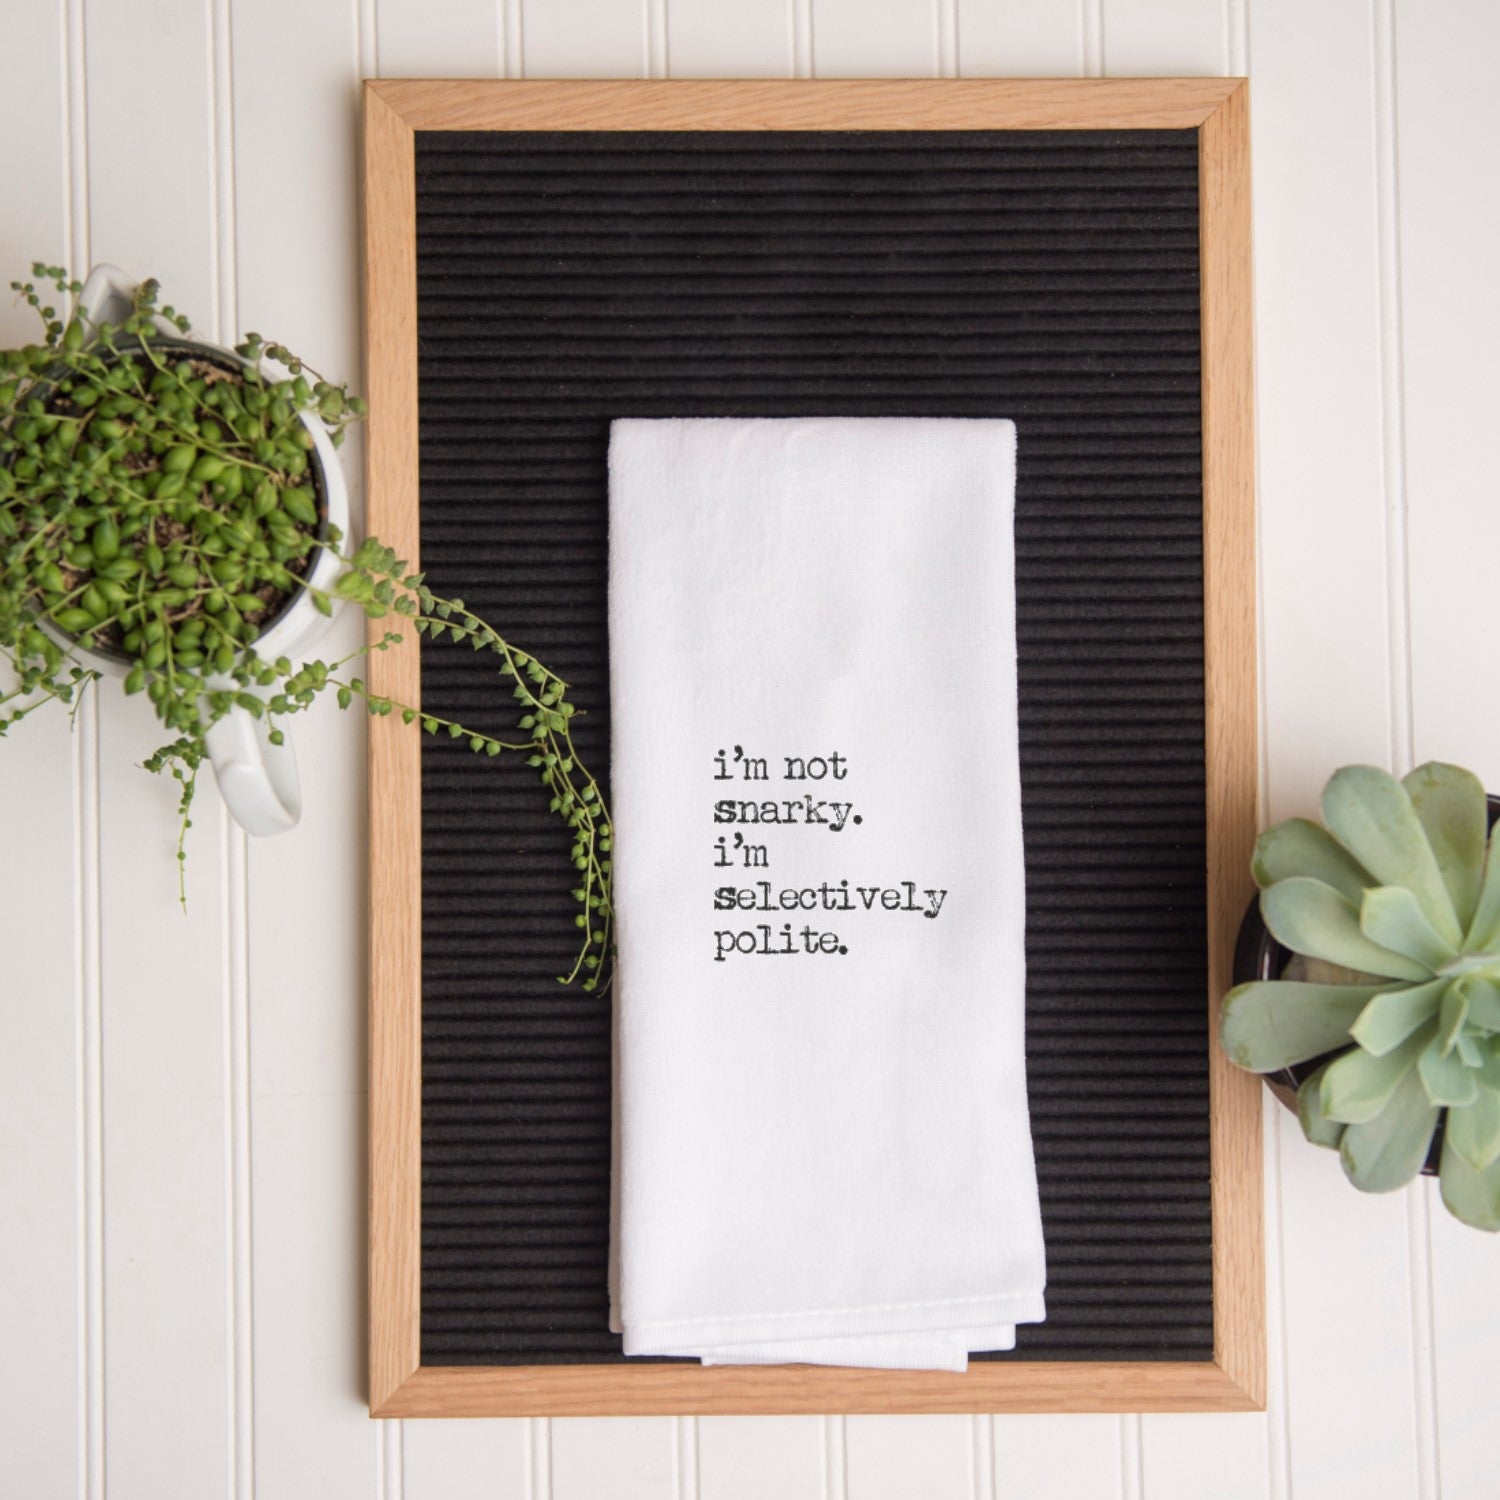 It's Always Happy Hour When I'm Camping Funny Kitchen Towels - Honey Dew  Gifts